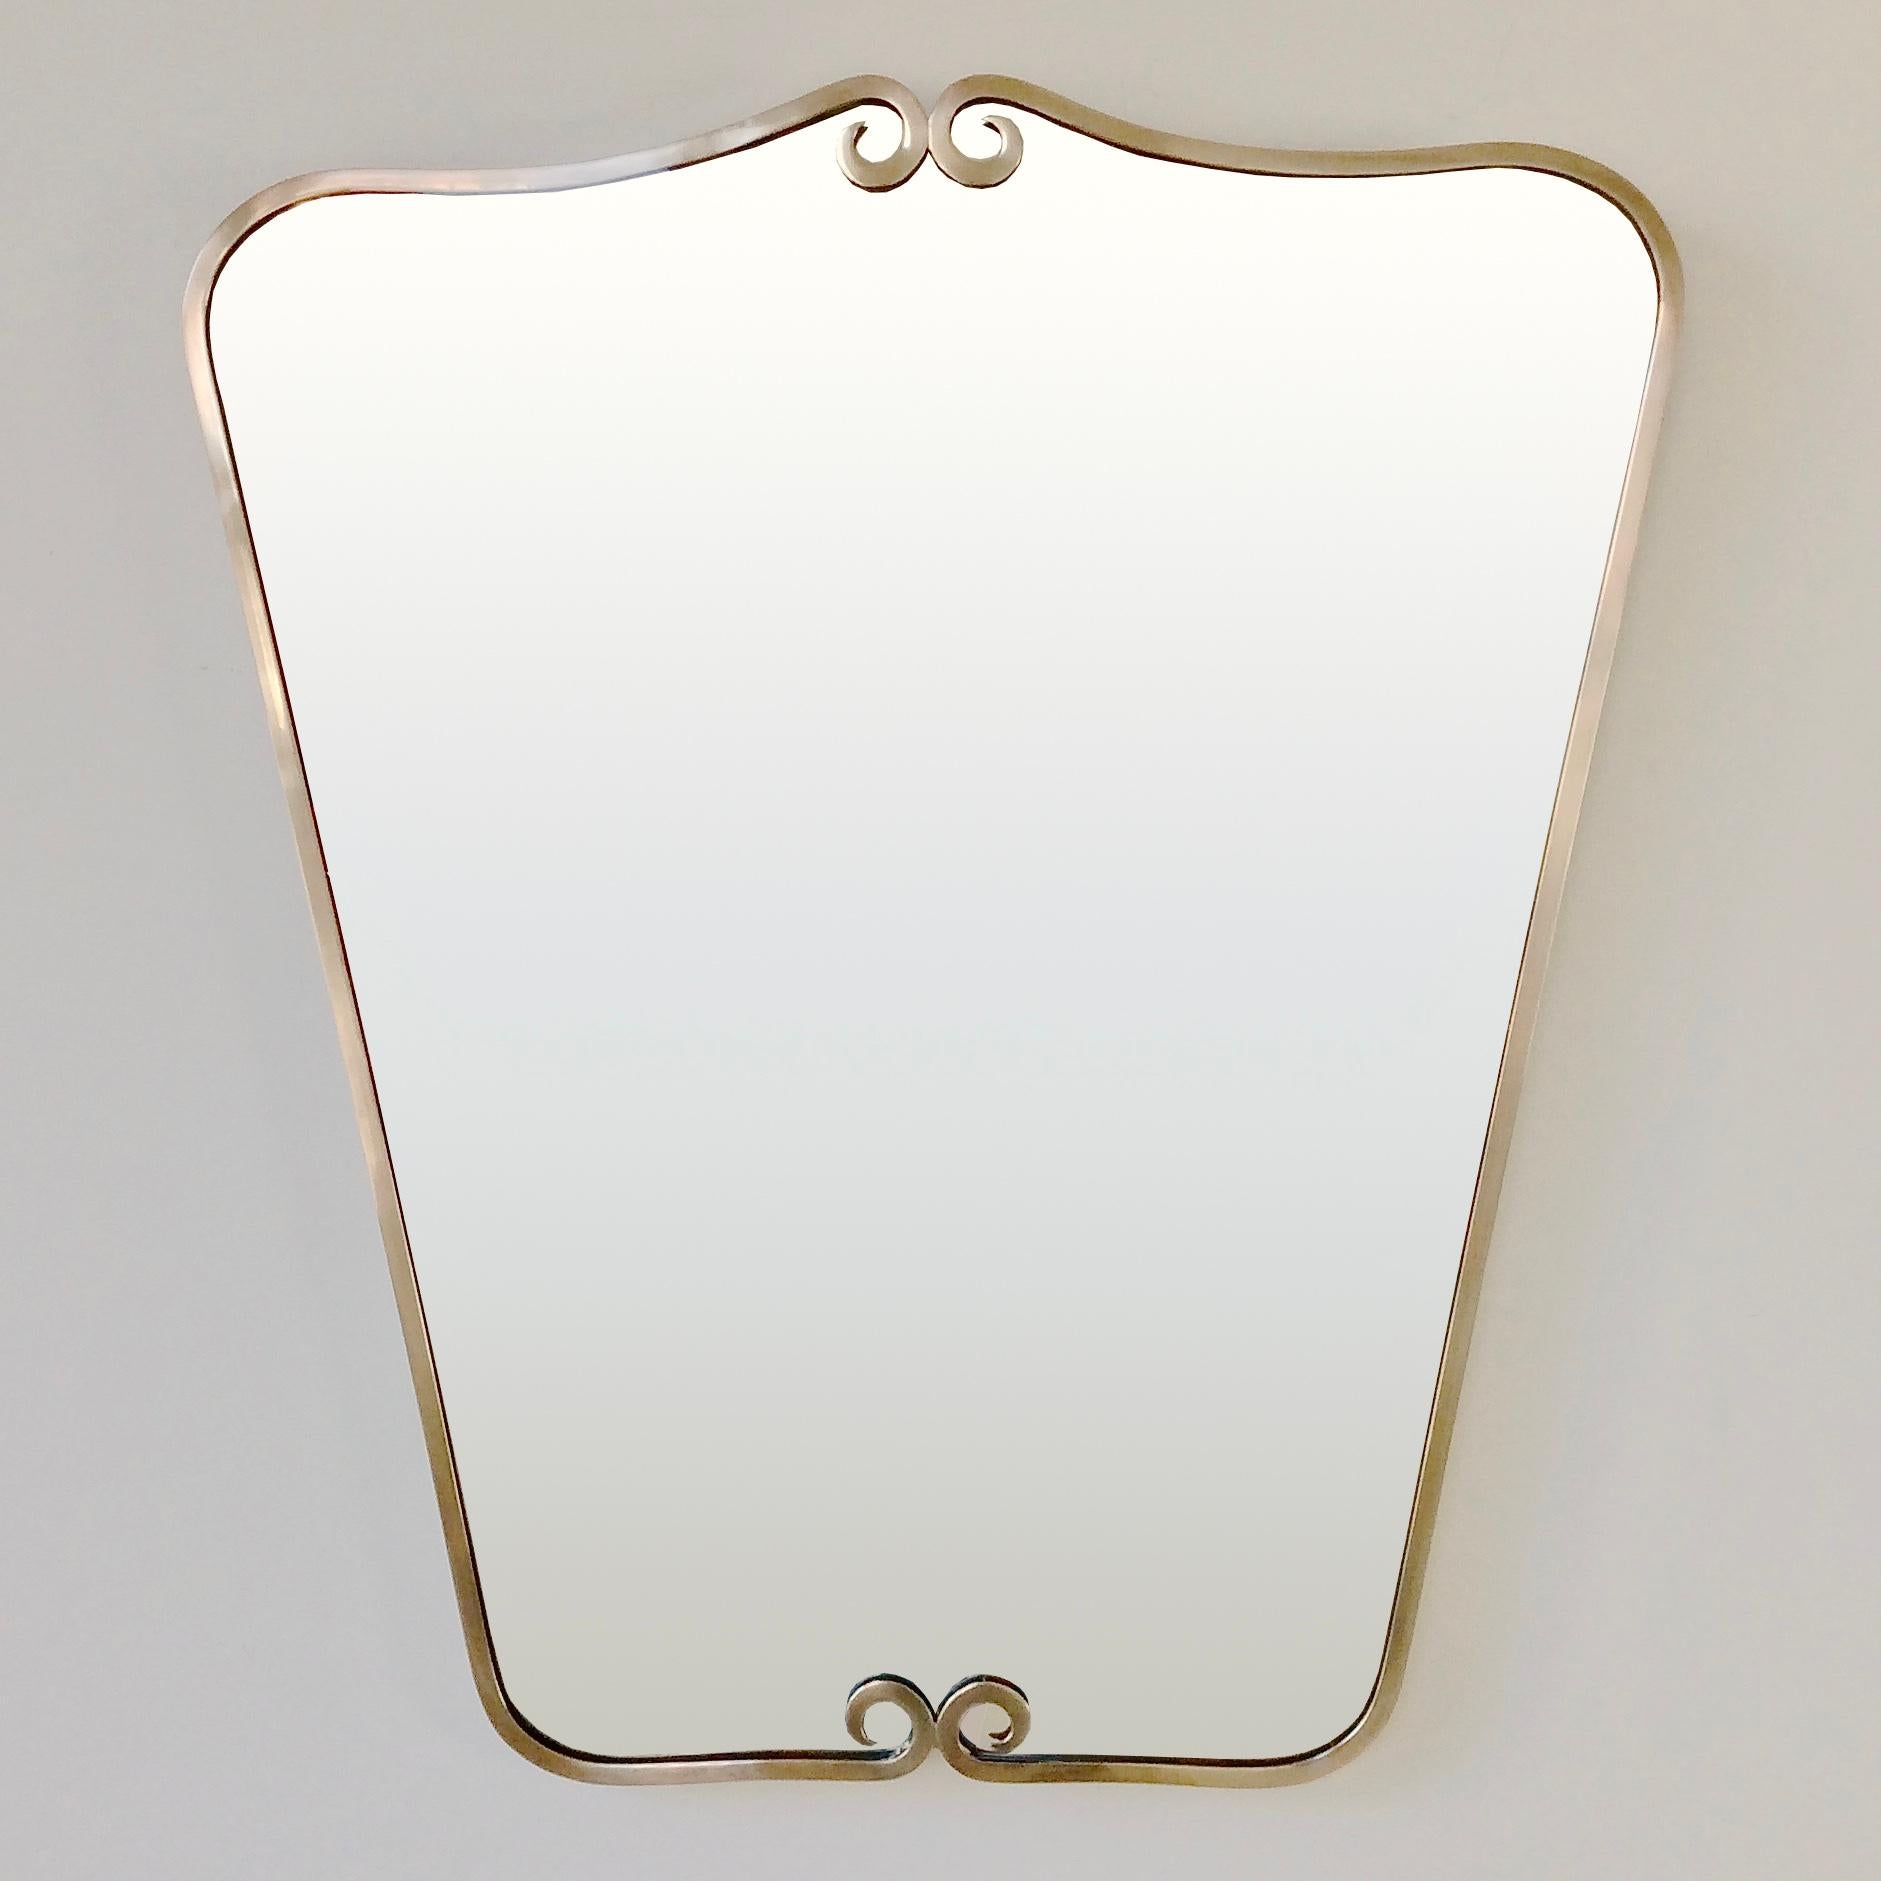 Elegant mid-century wall mirror, circa 1950, Italy.
Polished brass edging, original mirror.
Rare model.
Dimensions: 78 cm H, 67 cm W, 3 cm D.
All purchases are covered by our Buyer Protection Guarantee.
This item can be returned within 14 days